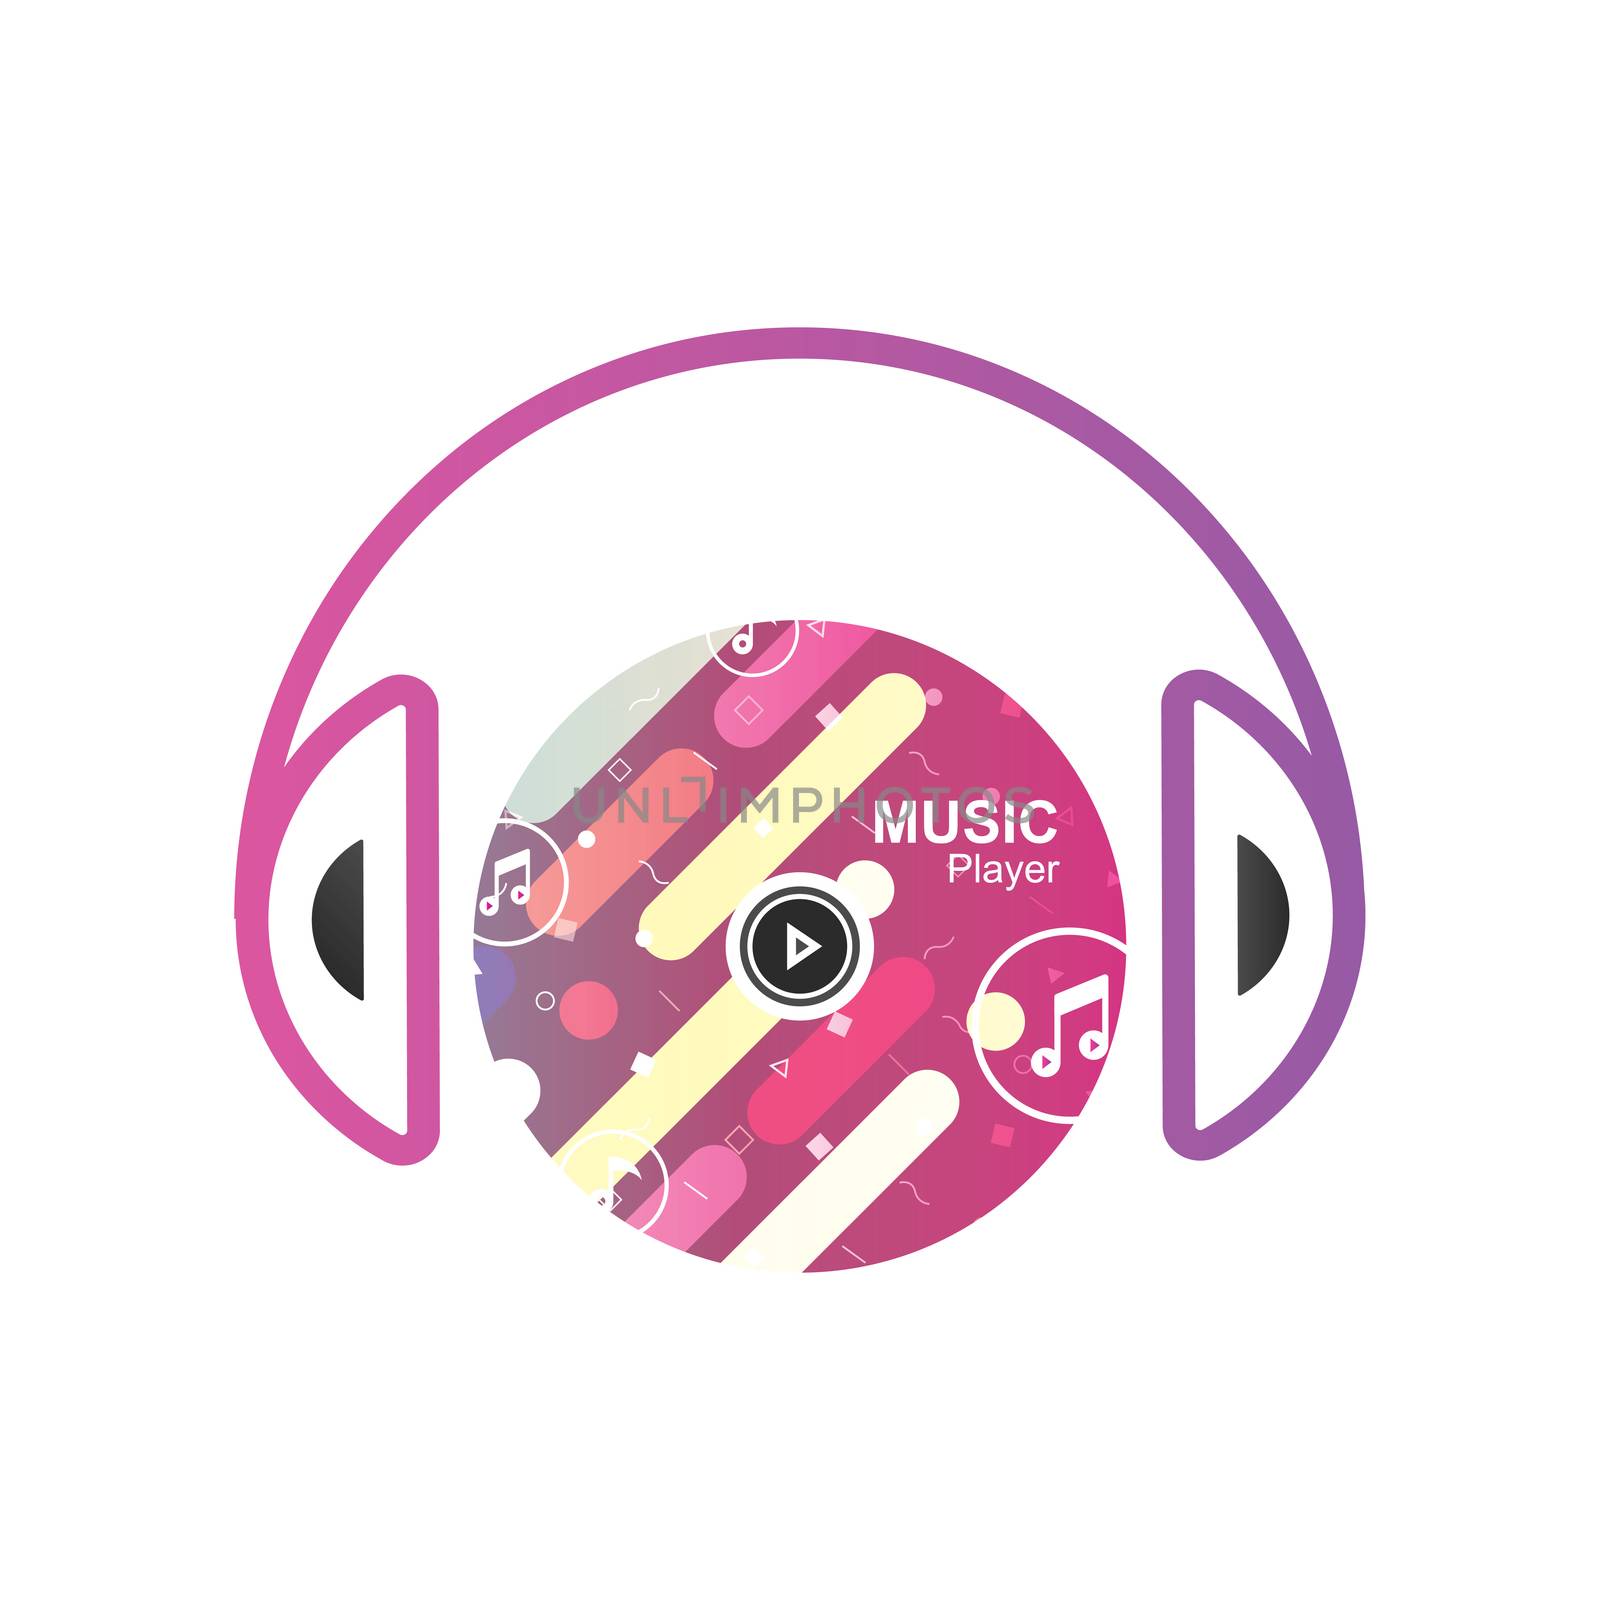 CD Music player concept by ArtTist